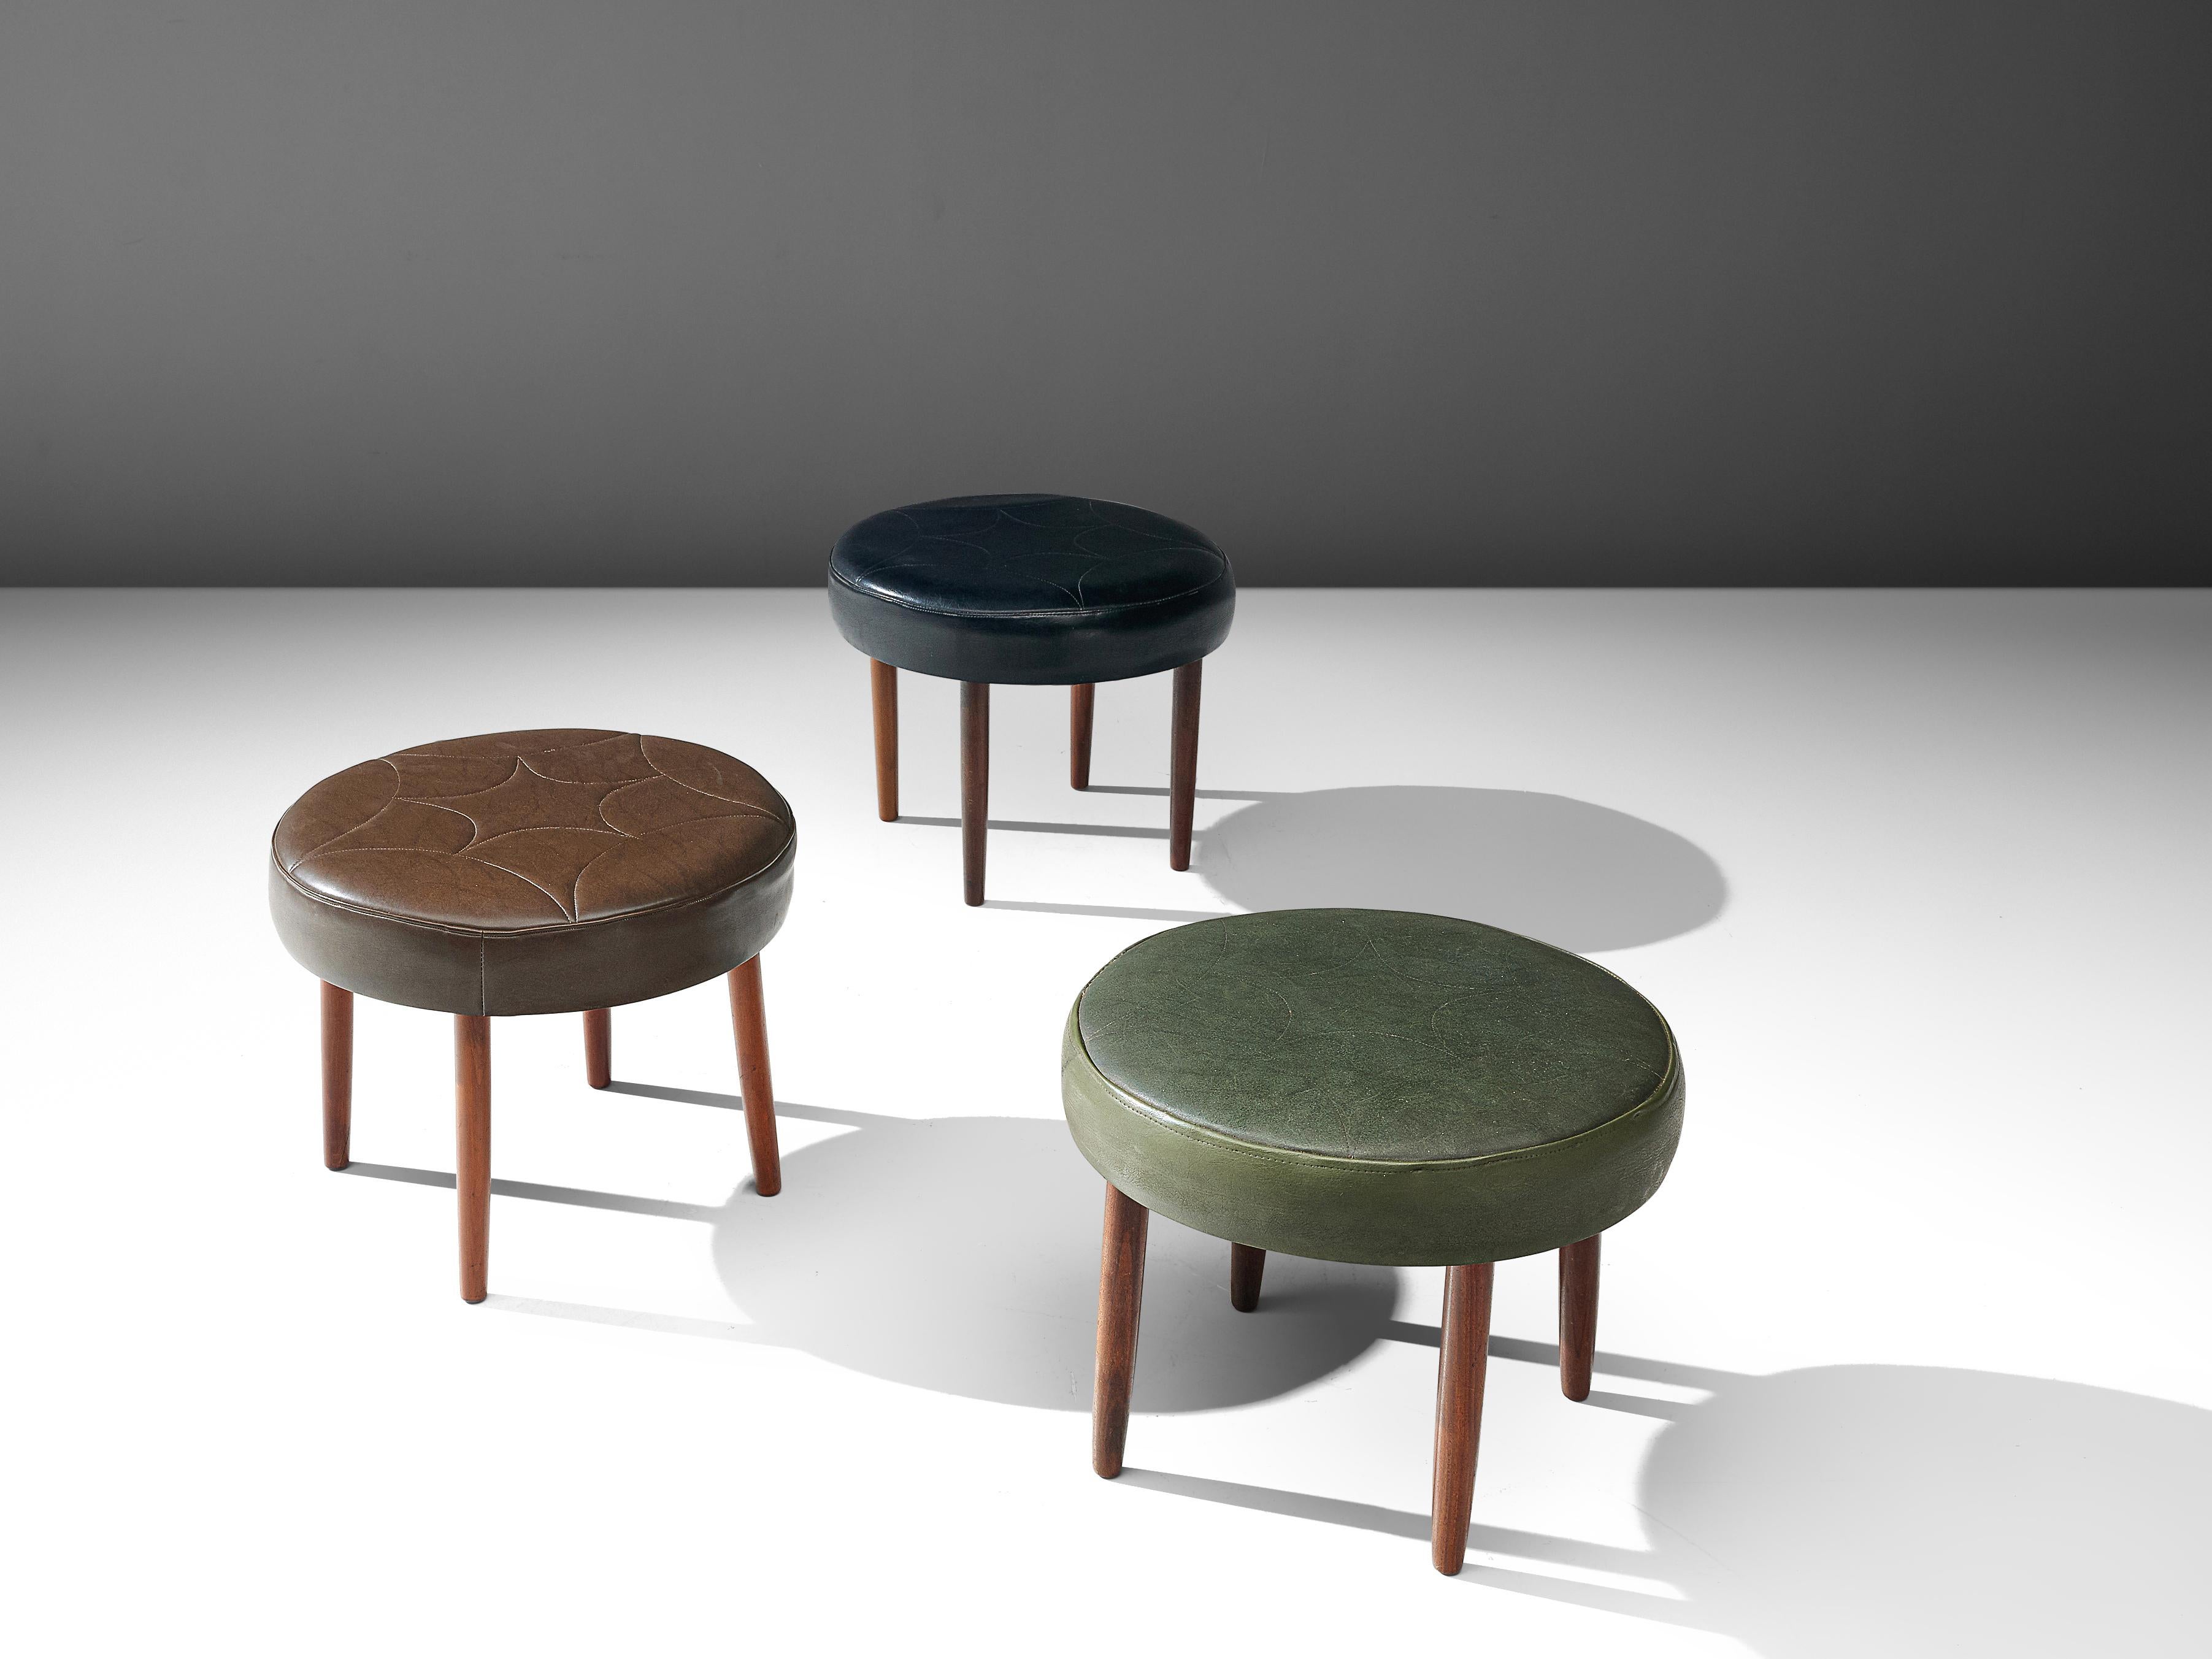 Stools, teak and leather, Denmark, 1960s

These modern Scandinavian stools are a wonderful addition to any interior, thanks to their minimalist aesthetics.The stools are equipped with a circular, thick cushion, upholstered in different colors of